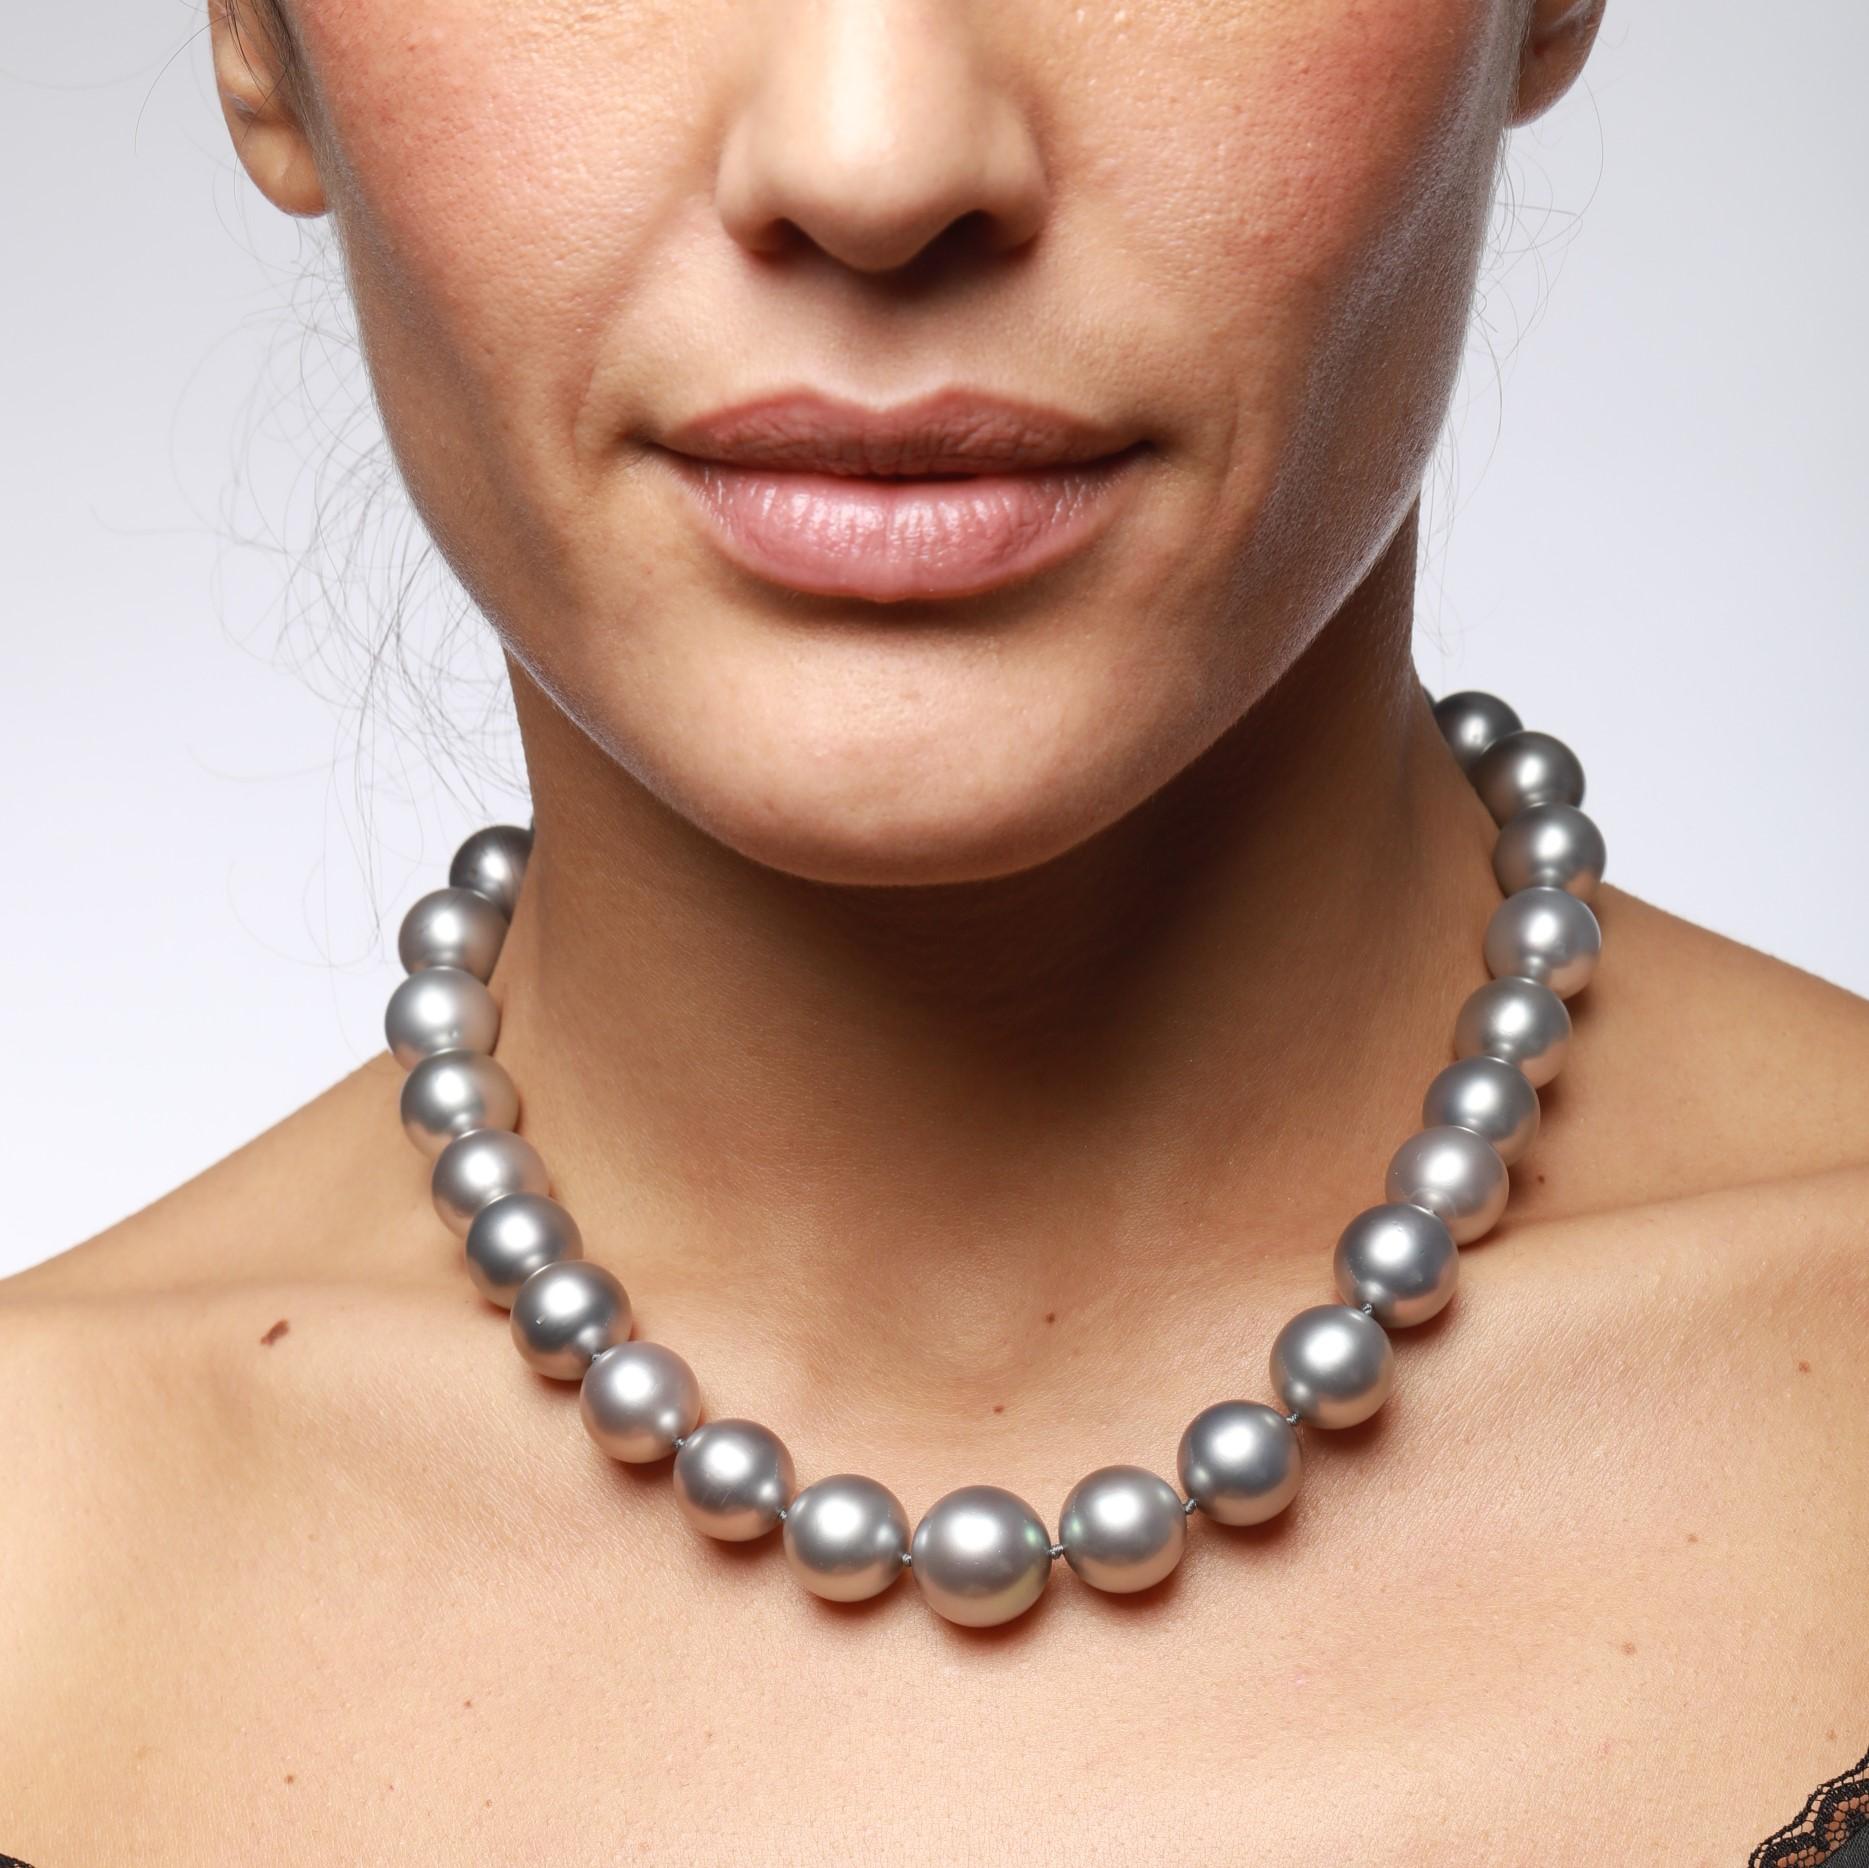 For a dramatic twist on the timeless pearl necklace trend, look to this extraordinary Tahitian black pearl necklace from David Morris. 

This one-of-a-kind piece features an incredibly rare collection of 29 natural black pearls with a captivating